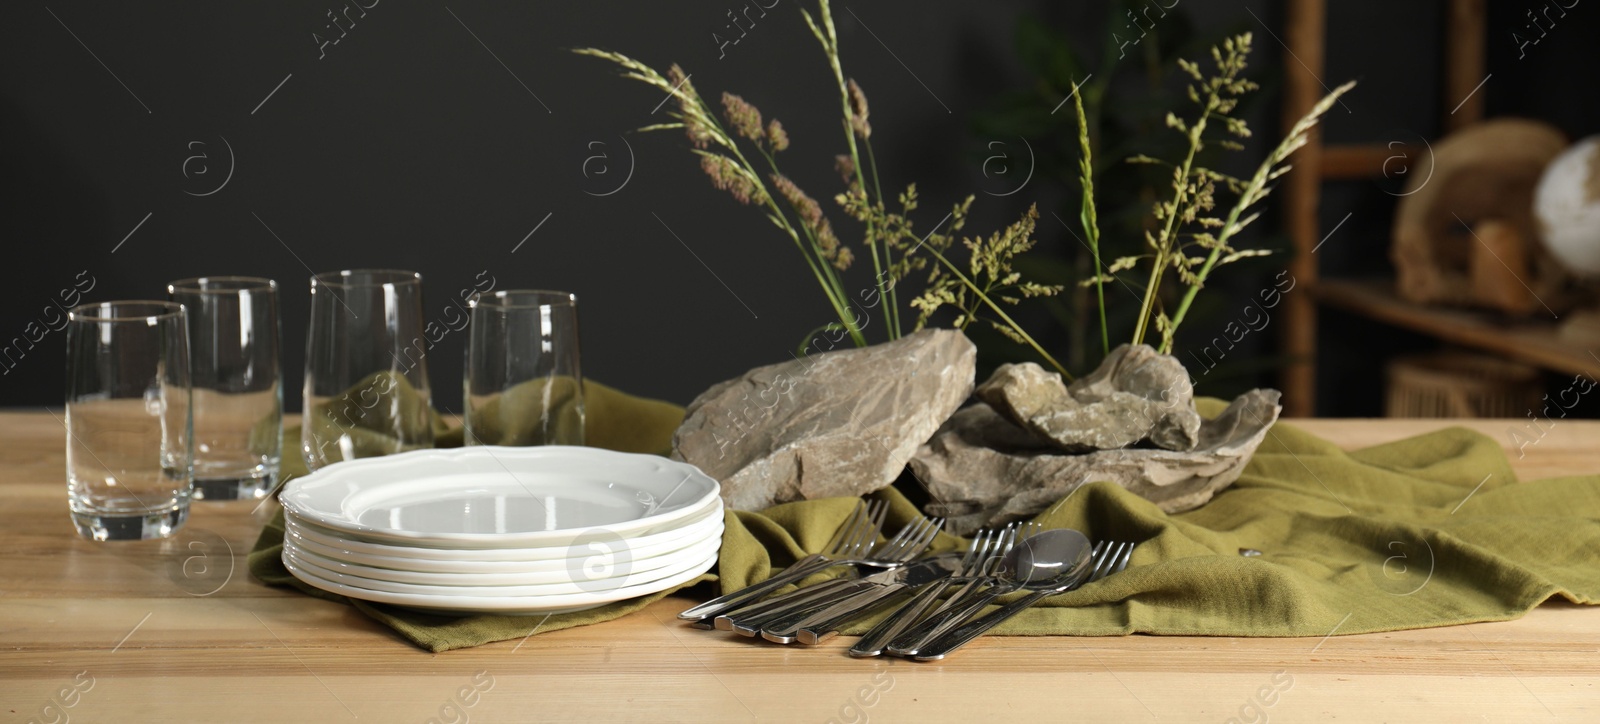 Photo of Clean dishes, stones and plants on wooden table in dining room